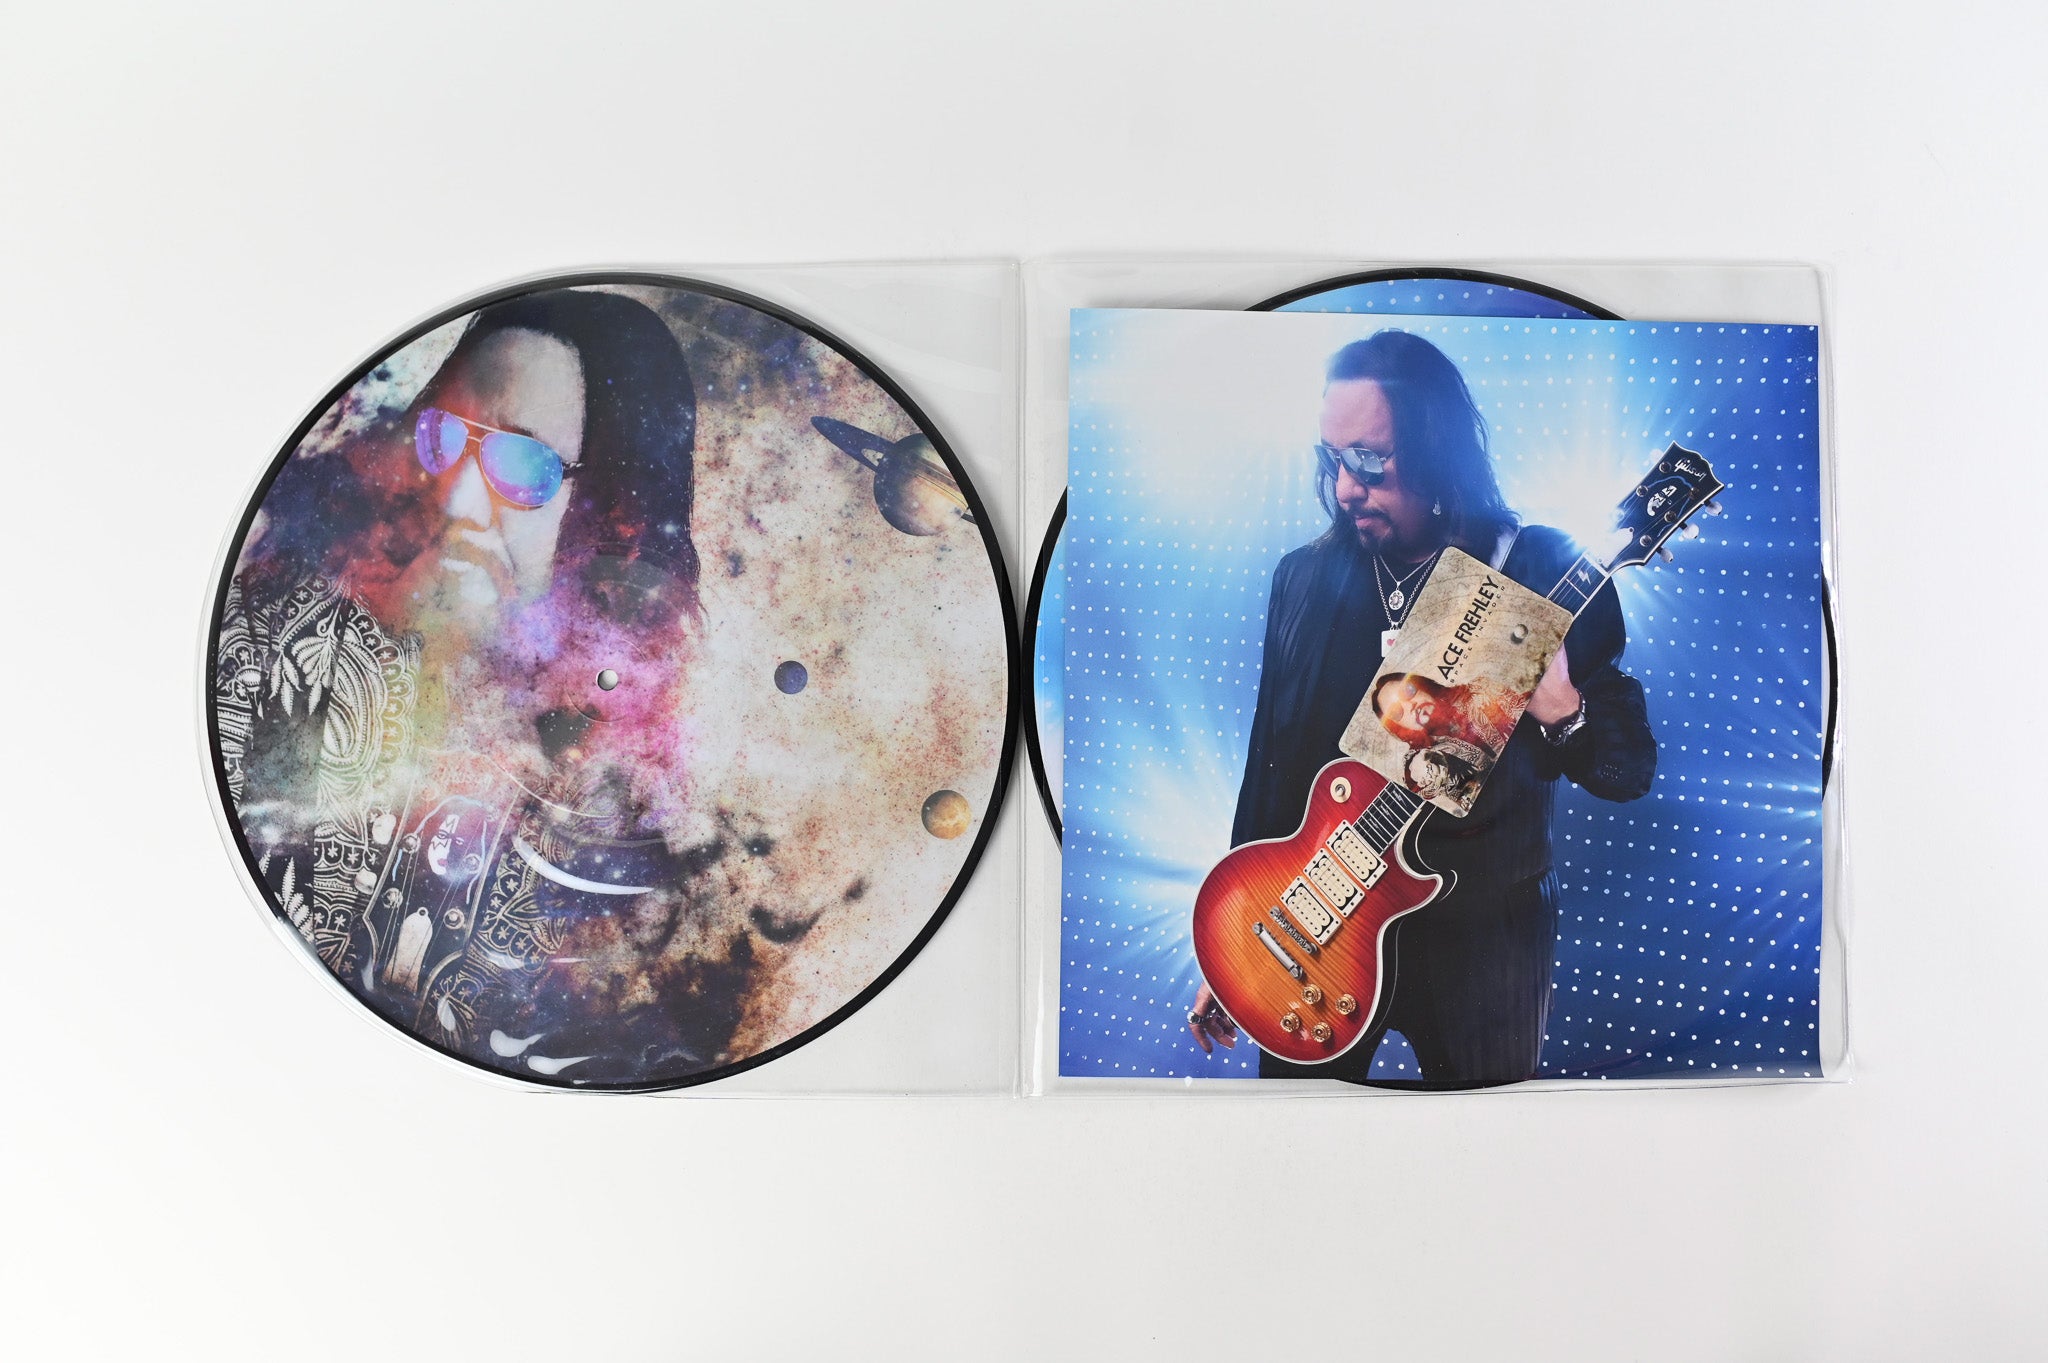 Ace Frehley - Space Invader on eOne Ltd Edition Picture Disc Reissue